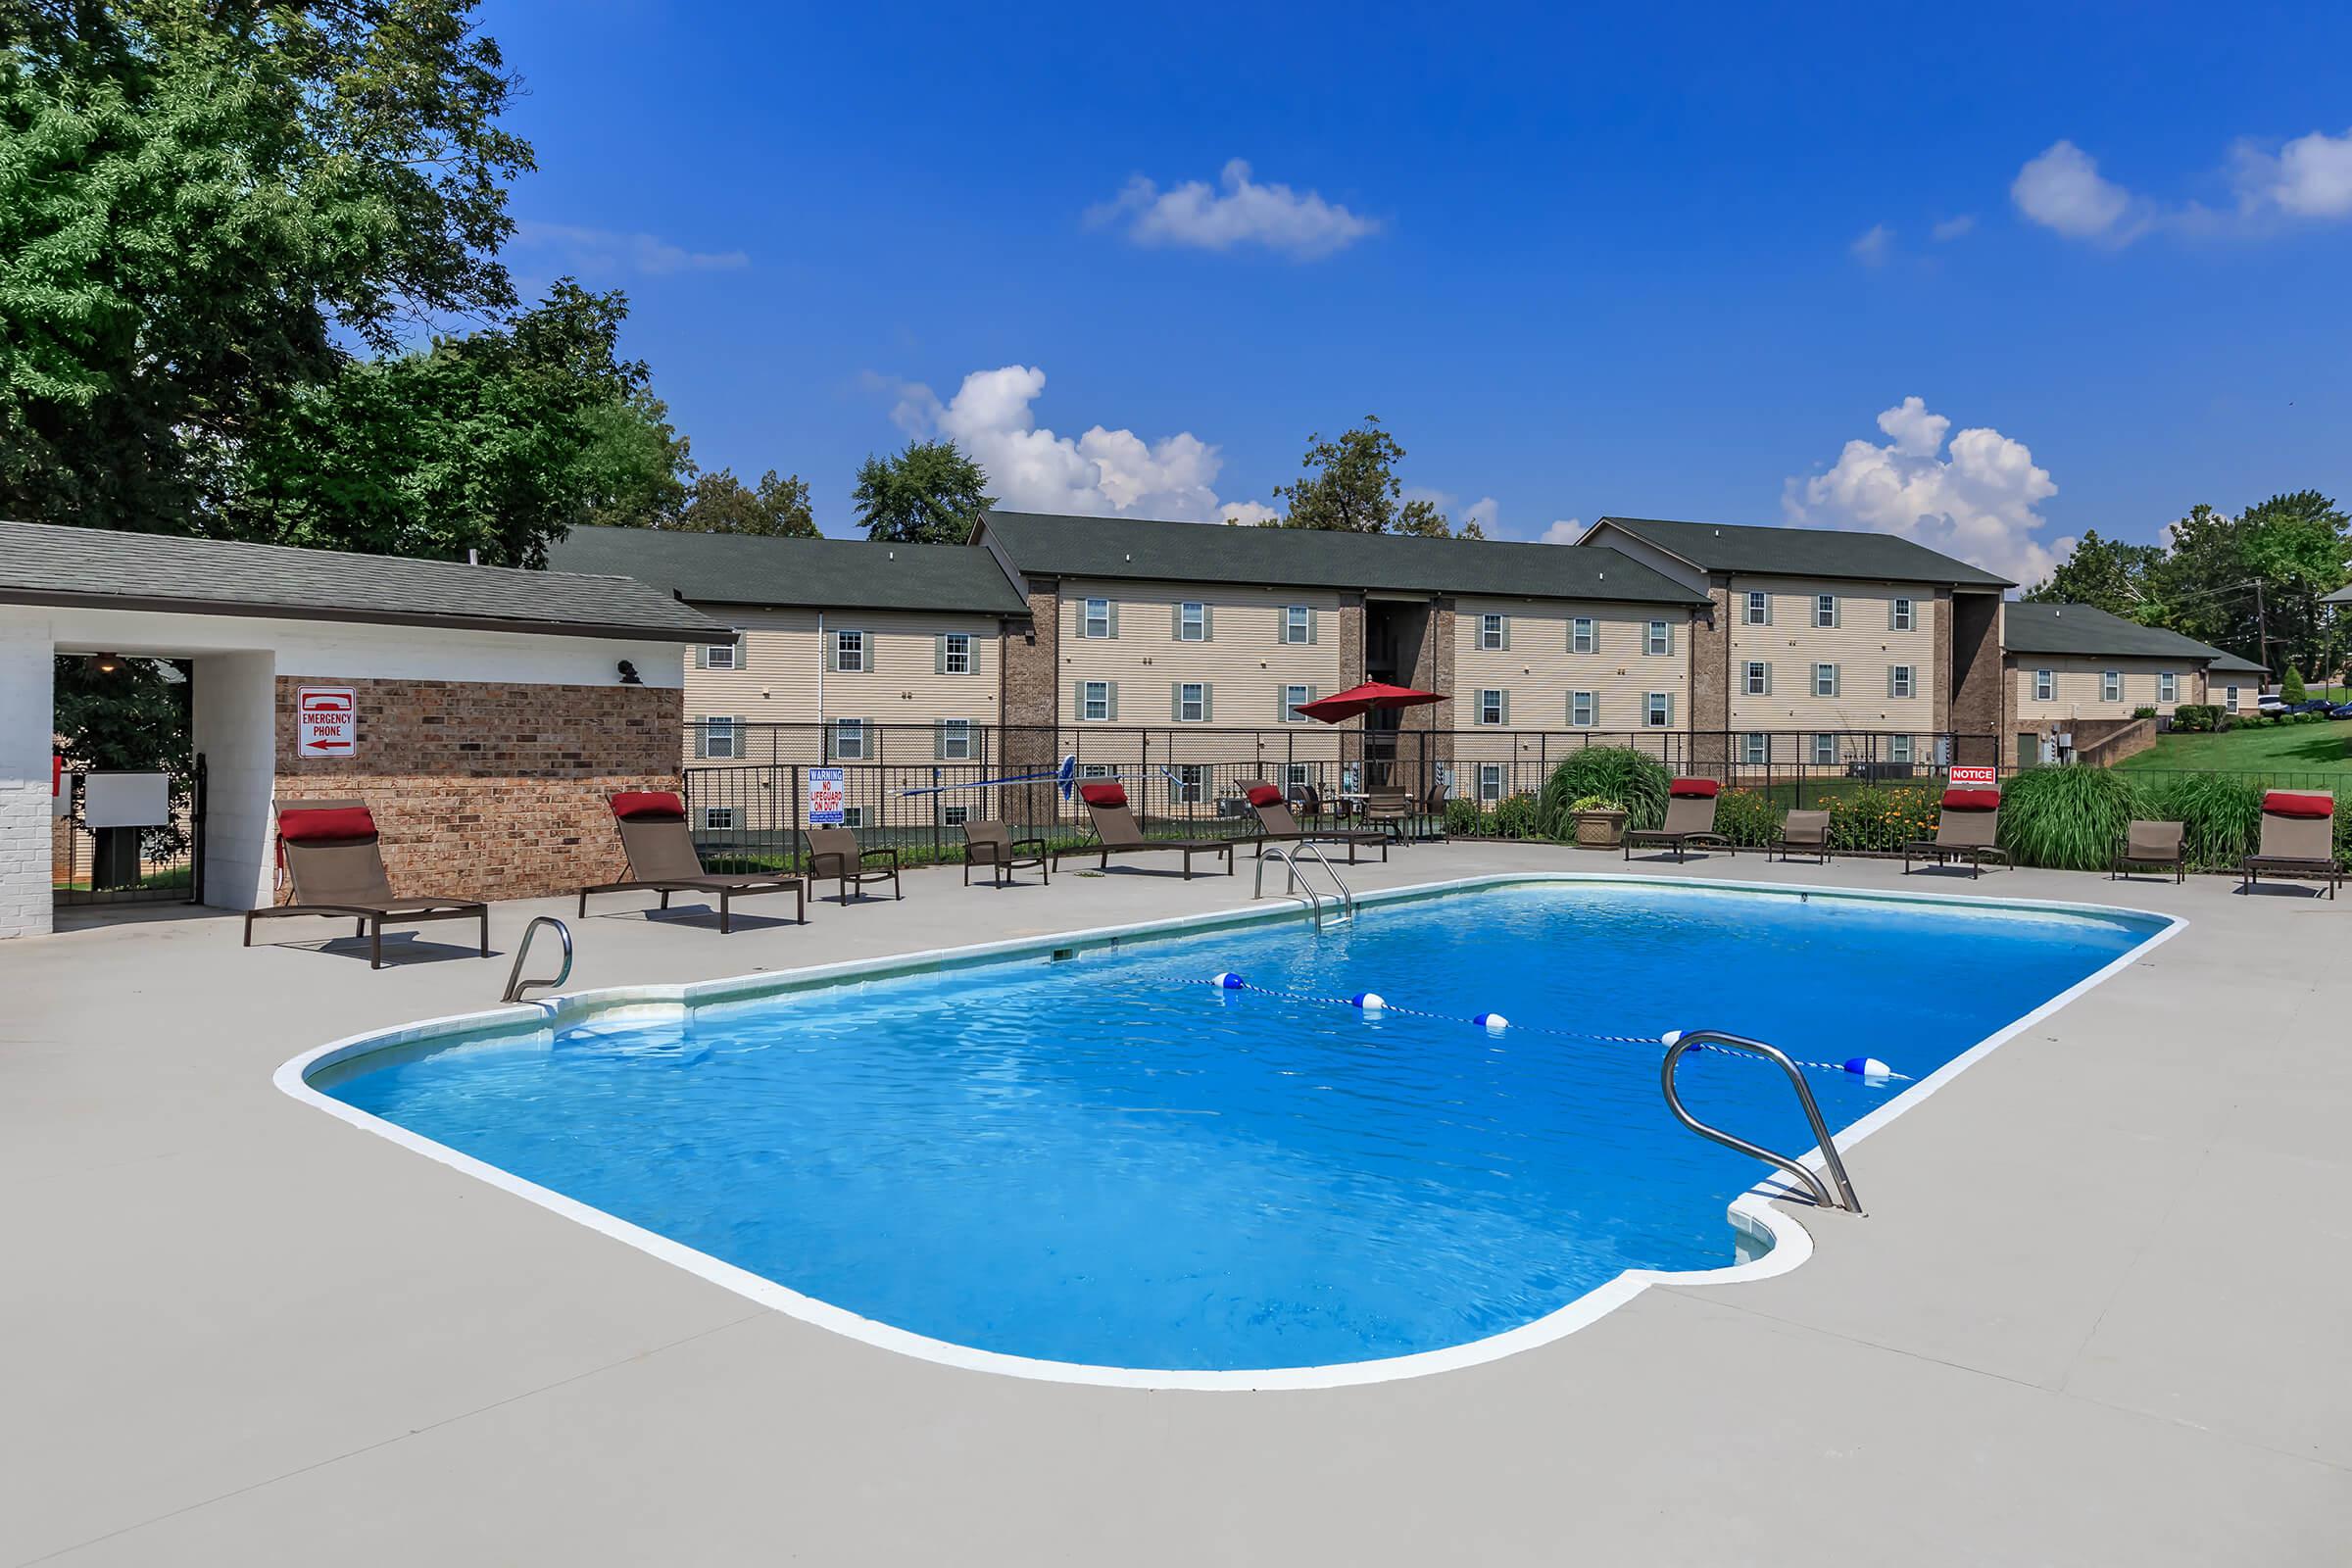 Make waves at our pool in Eagles Crest at Jack Miller in Clarksville, TN